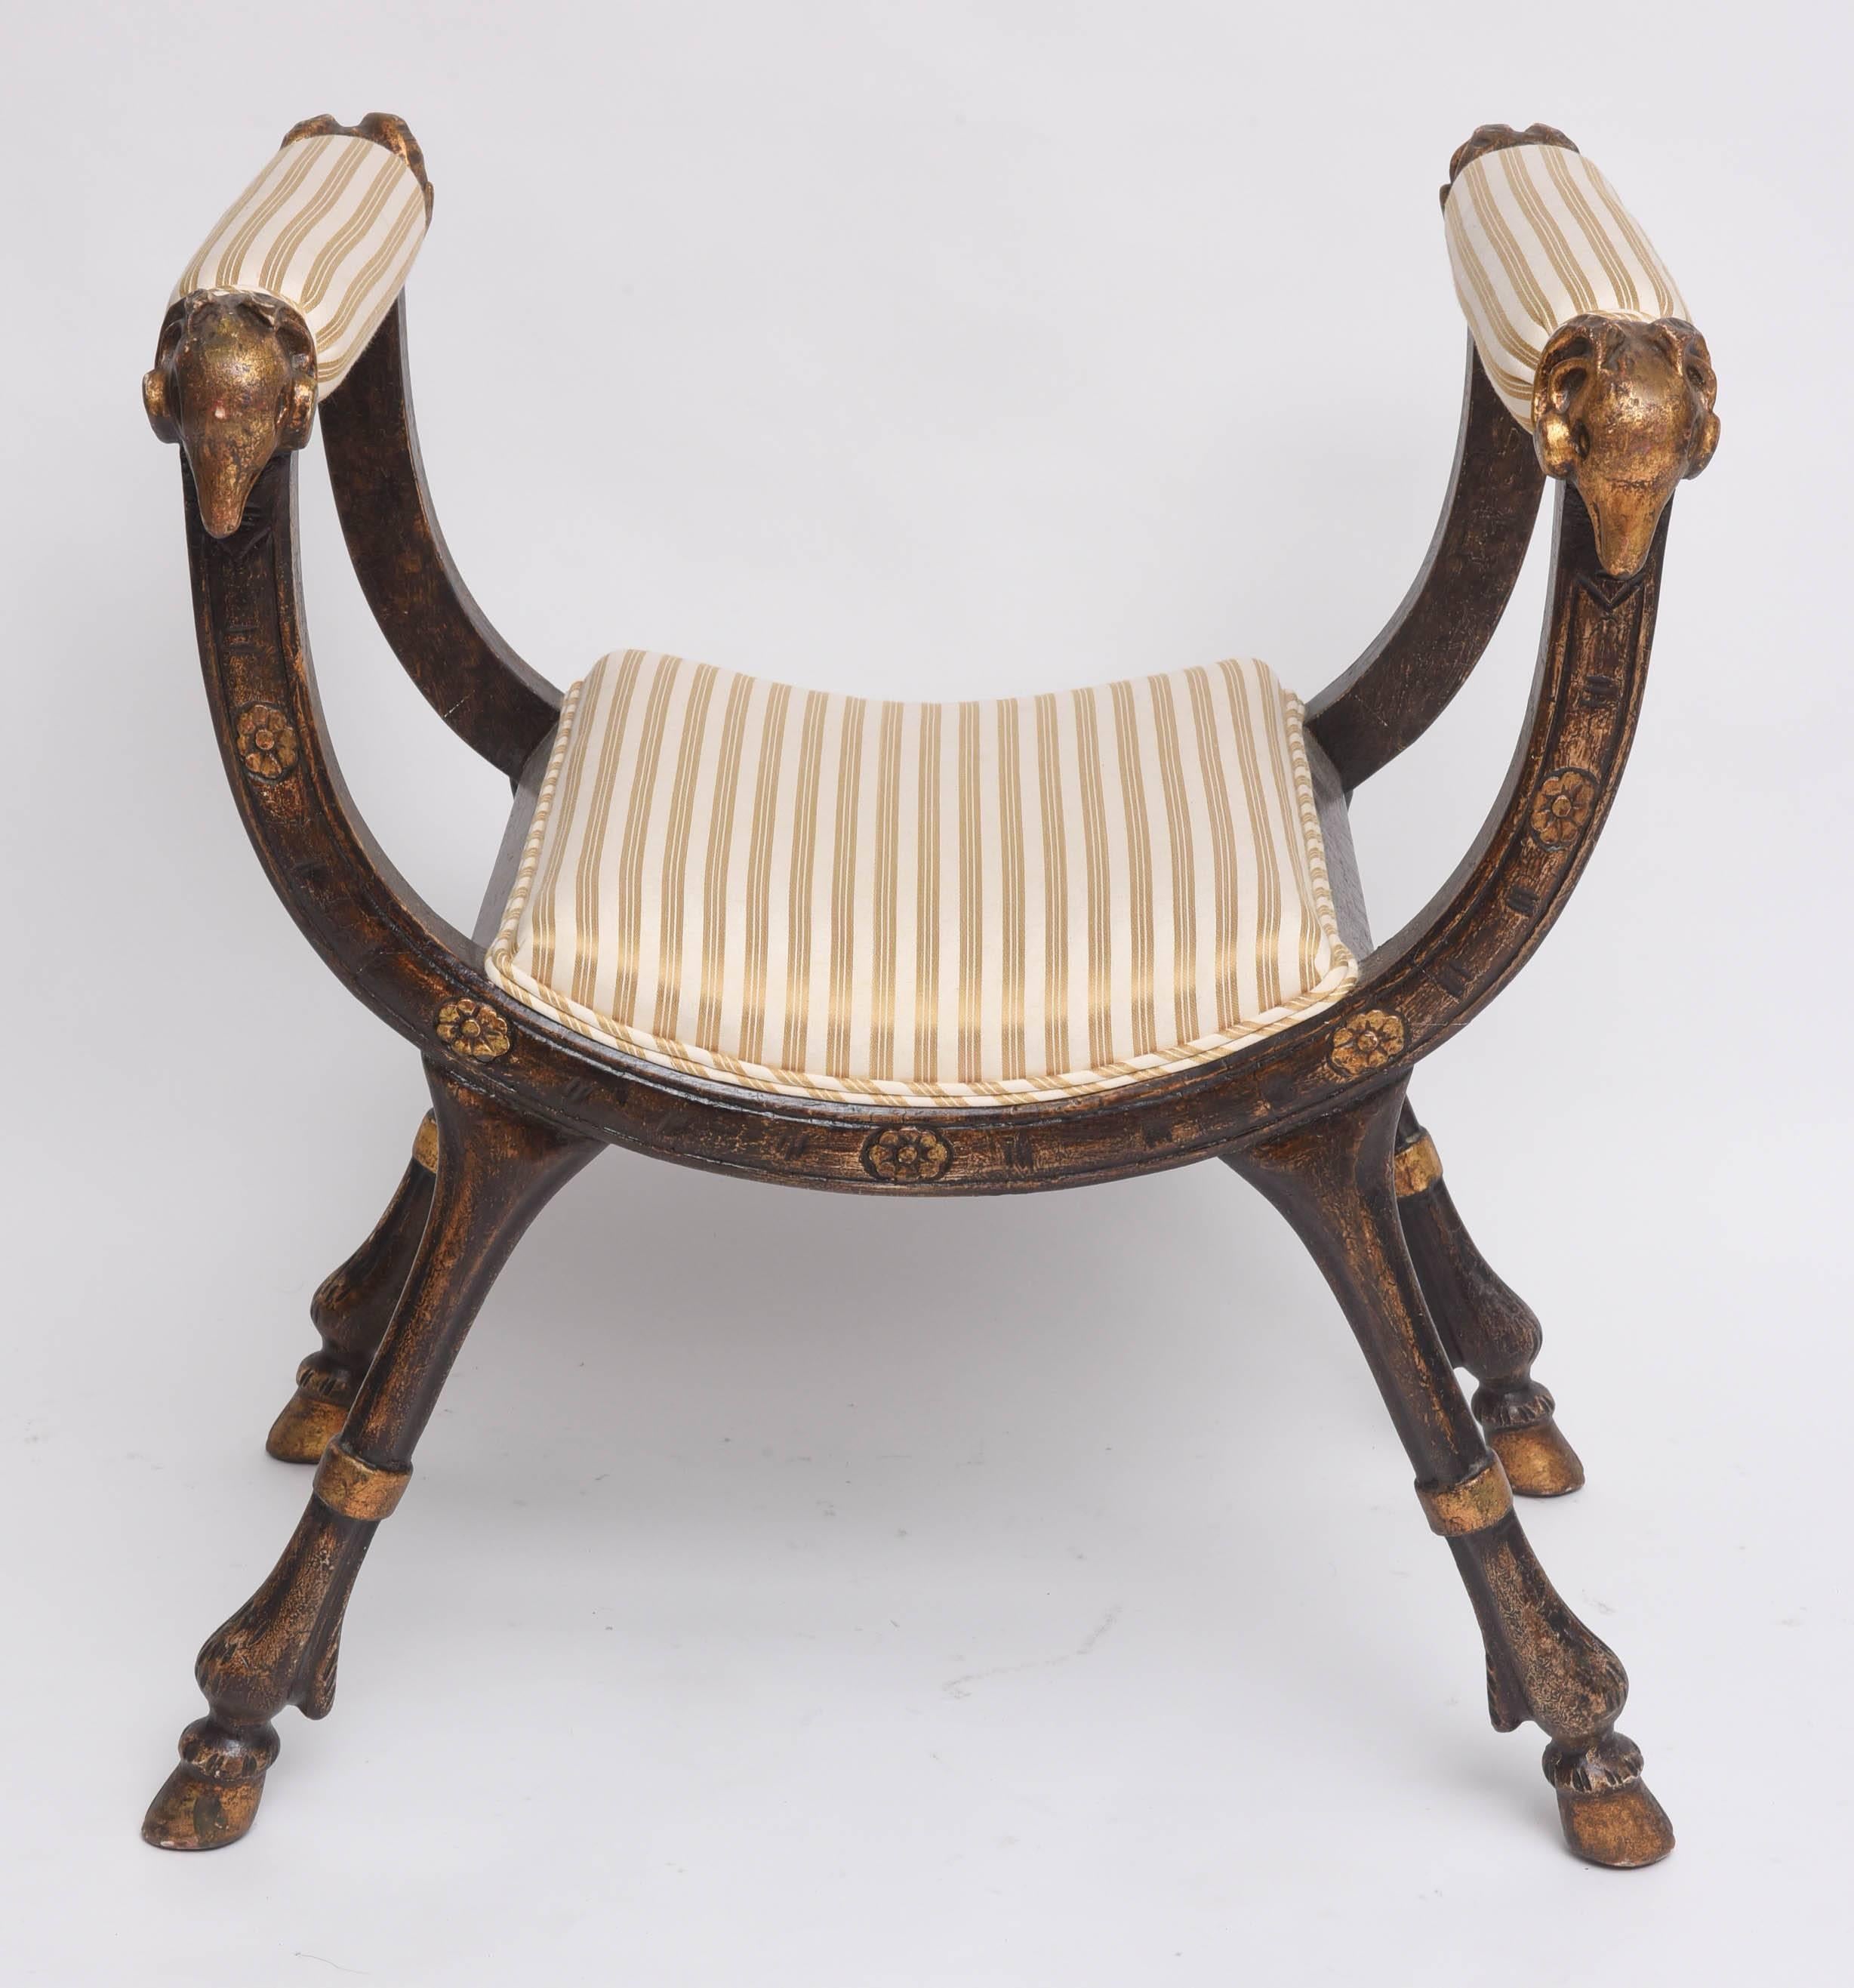 This amazing Neo-Classical style curule bench was acquired from a prominent Palm Beach estate.  The piece was definitely carved by a master-craftsman with its stylized rams-heads and hoofed-legs.  The piece retains its original painted and